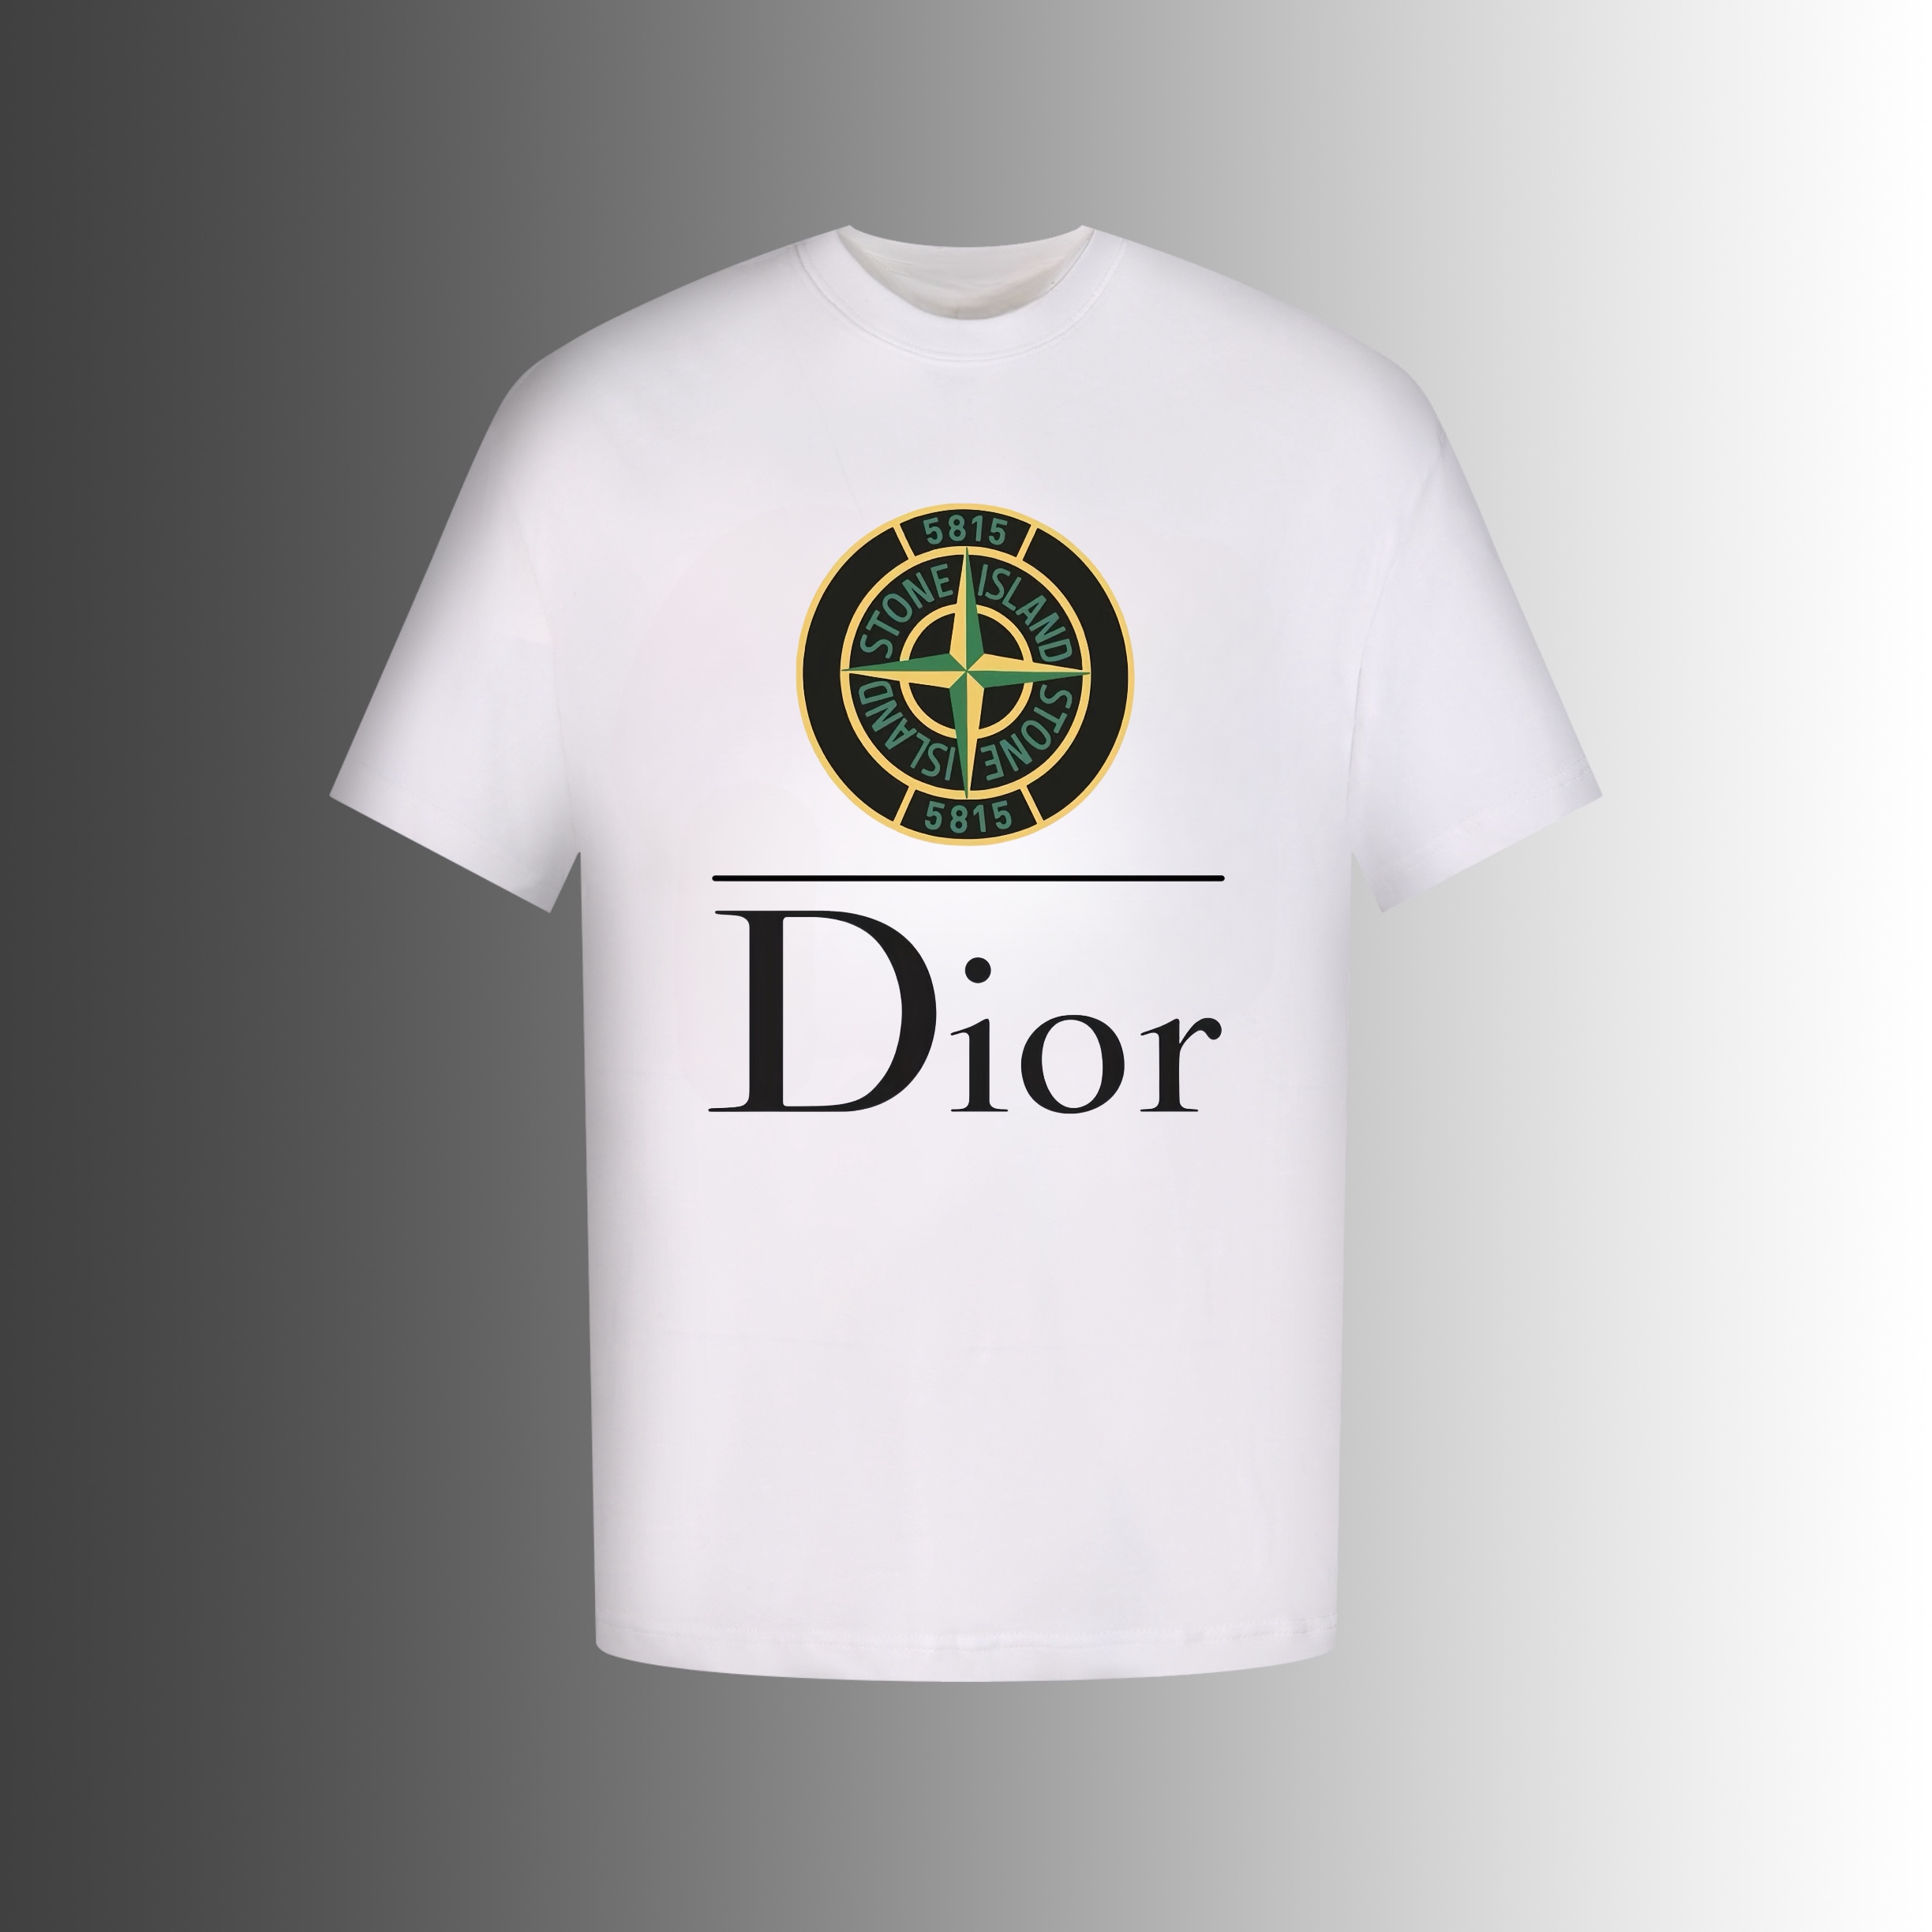 Dior Clothing T-Shirt Printing Unisex Cotton Spring/Summer Collection Short Sleeve